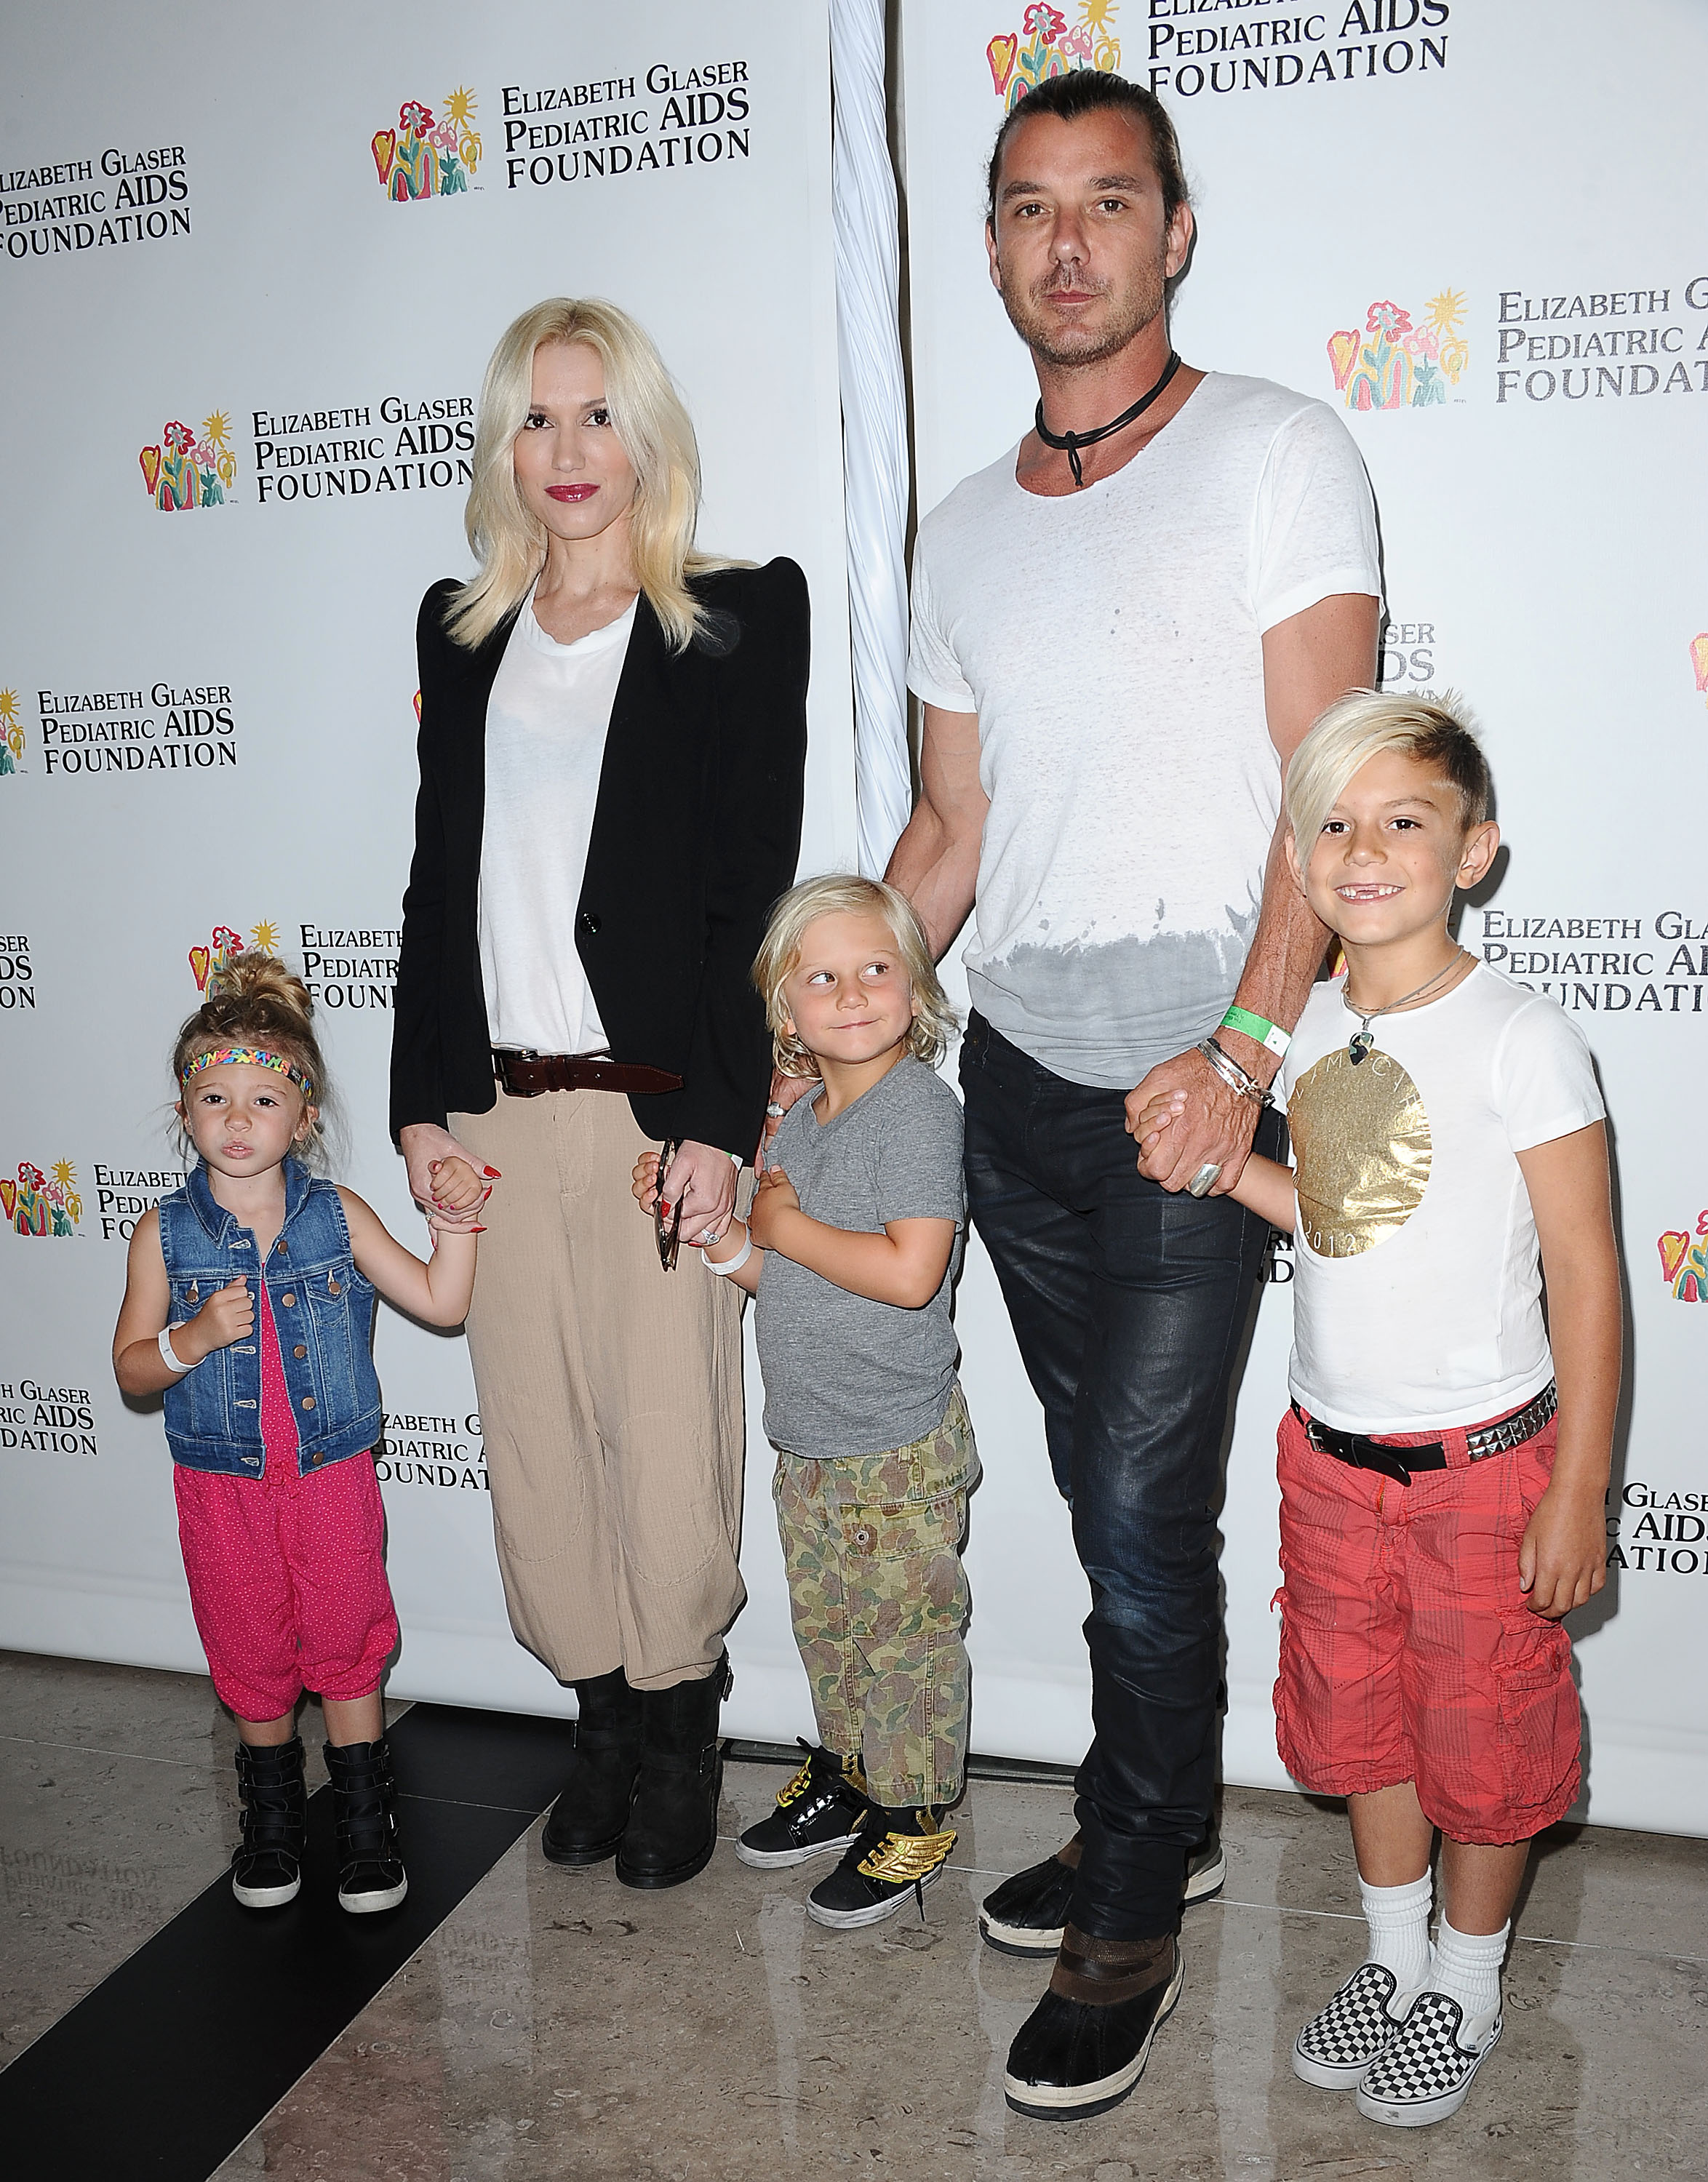 Stella Stefani, Gwen Stefani, Zuma Rossdale, Gavin Rossdale, and Kingston Rossdale attend the Elizabeth Glaser Pediatric AIDS Foundation's 24th annual "A Time For Heroes" in Los Angeles, California, on June 2, 2013. | Source: Getty Images